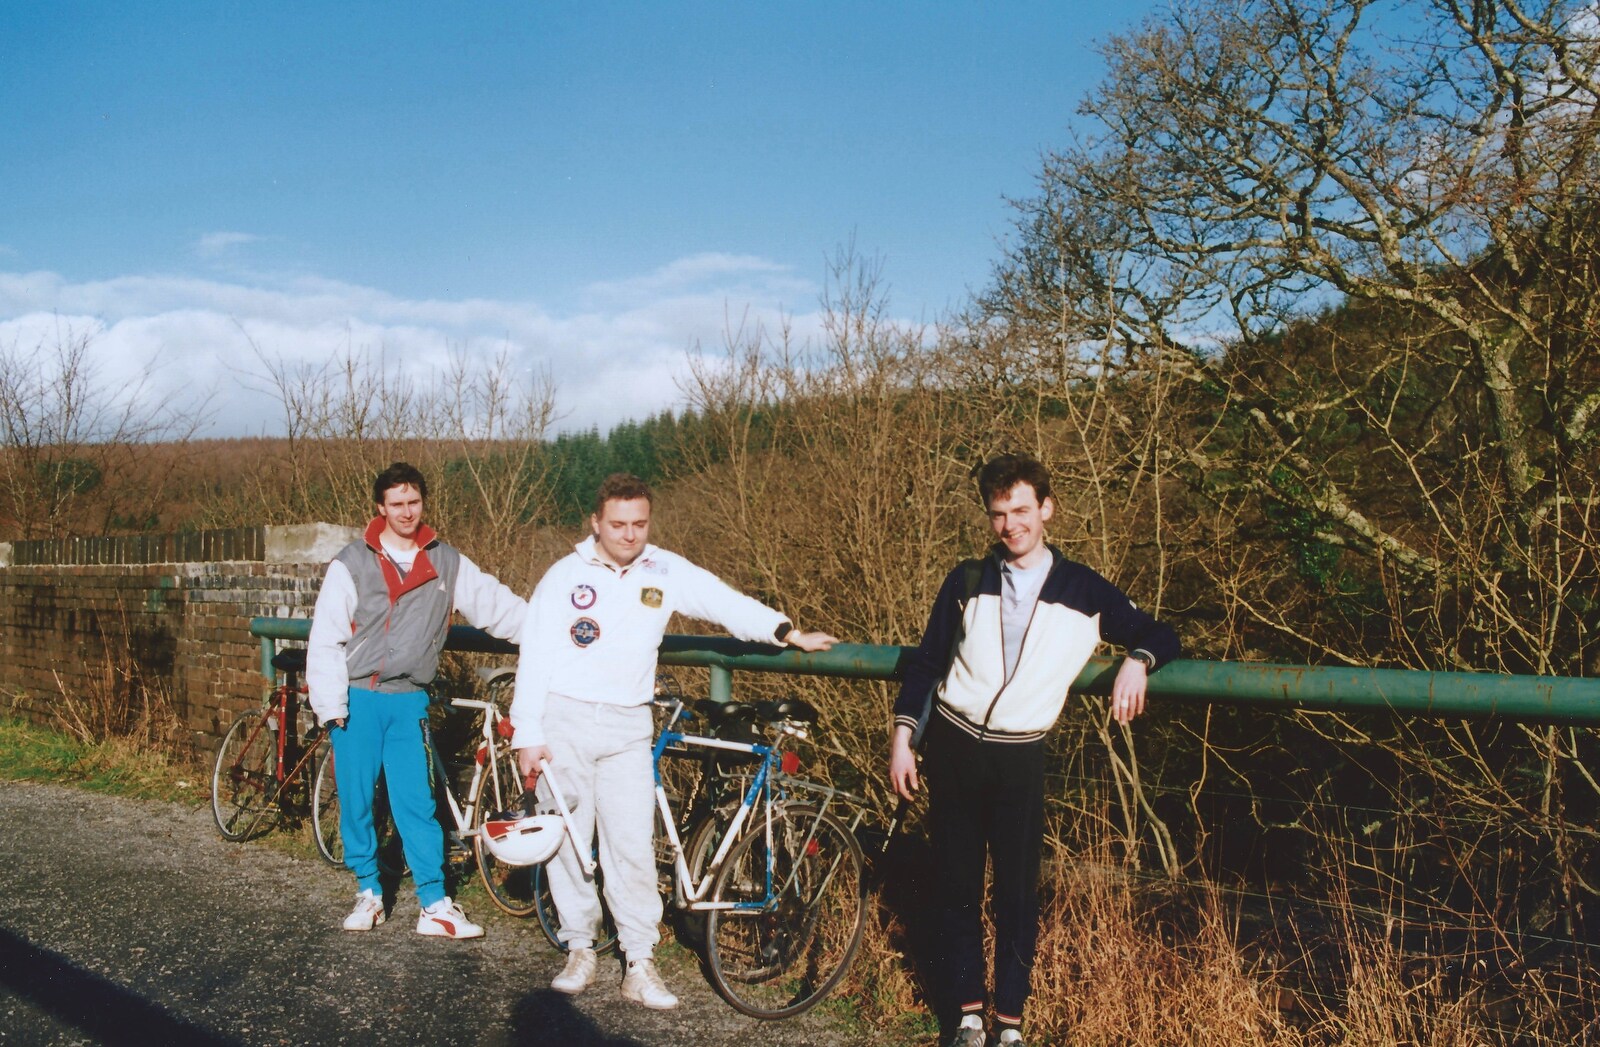 Riki, Feature and John on a railway viaduct from Uni: A Ride on the Plym Valley Cycle Path, Plymstock, Devon - 26th February 1989